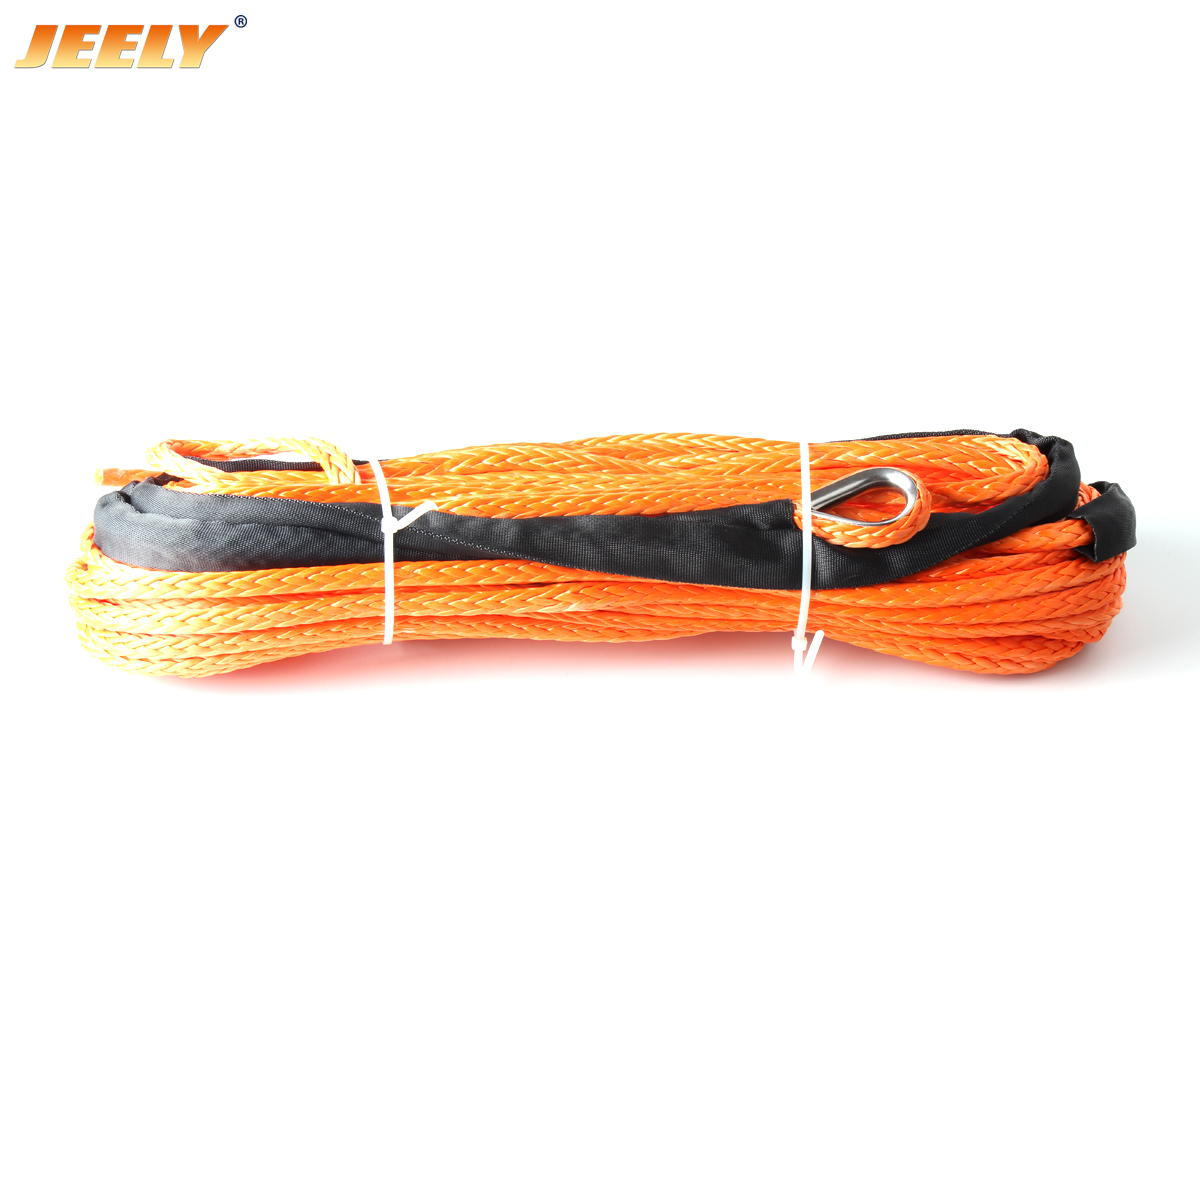 10mm*15m 12 strand 16534lbs uhmwpe synthetic car tow cable with tow eye Winch Rope